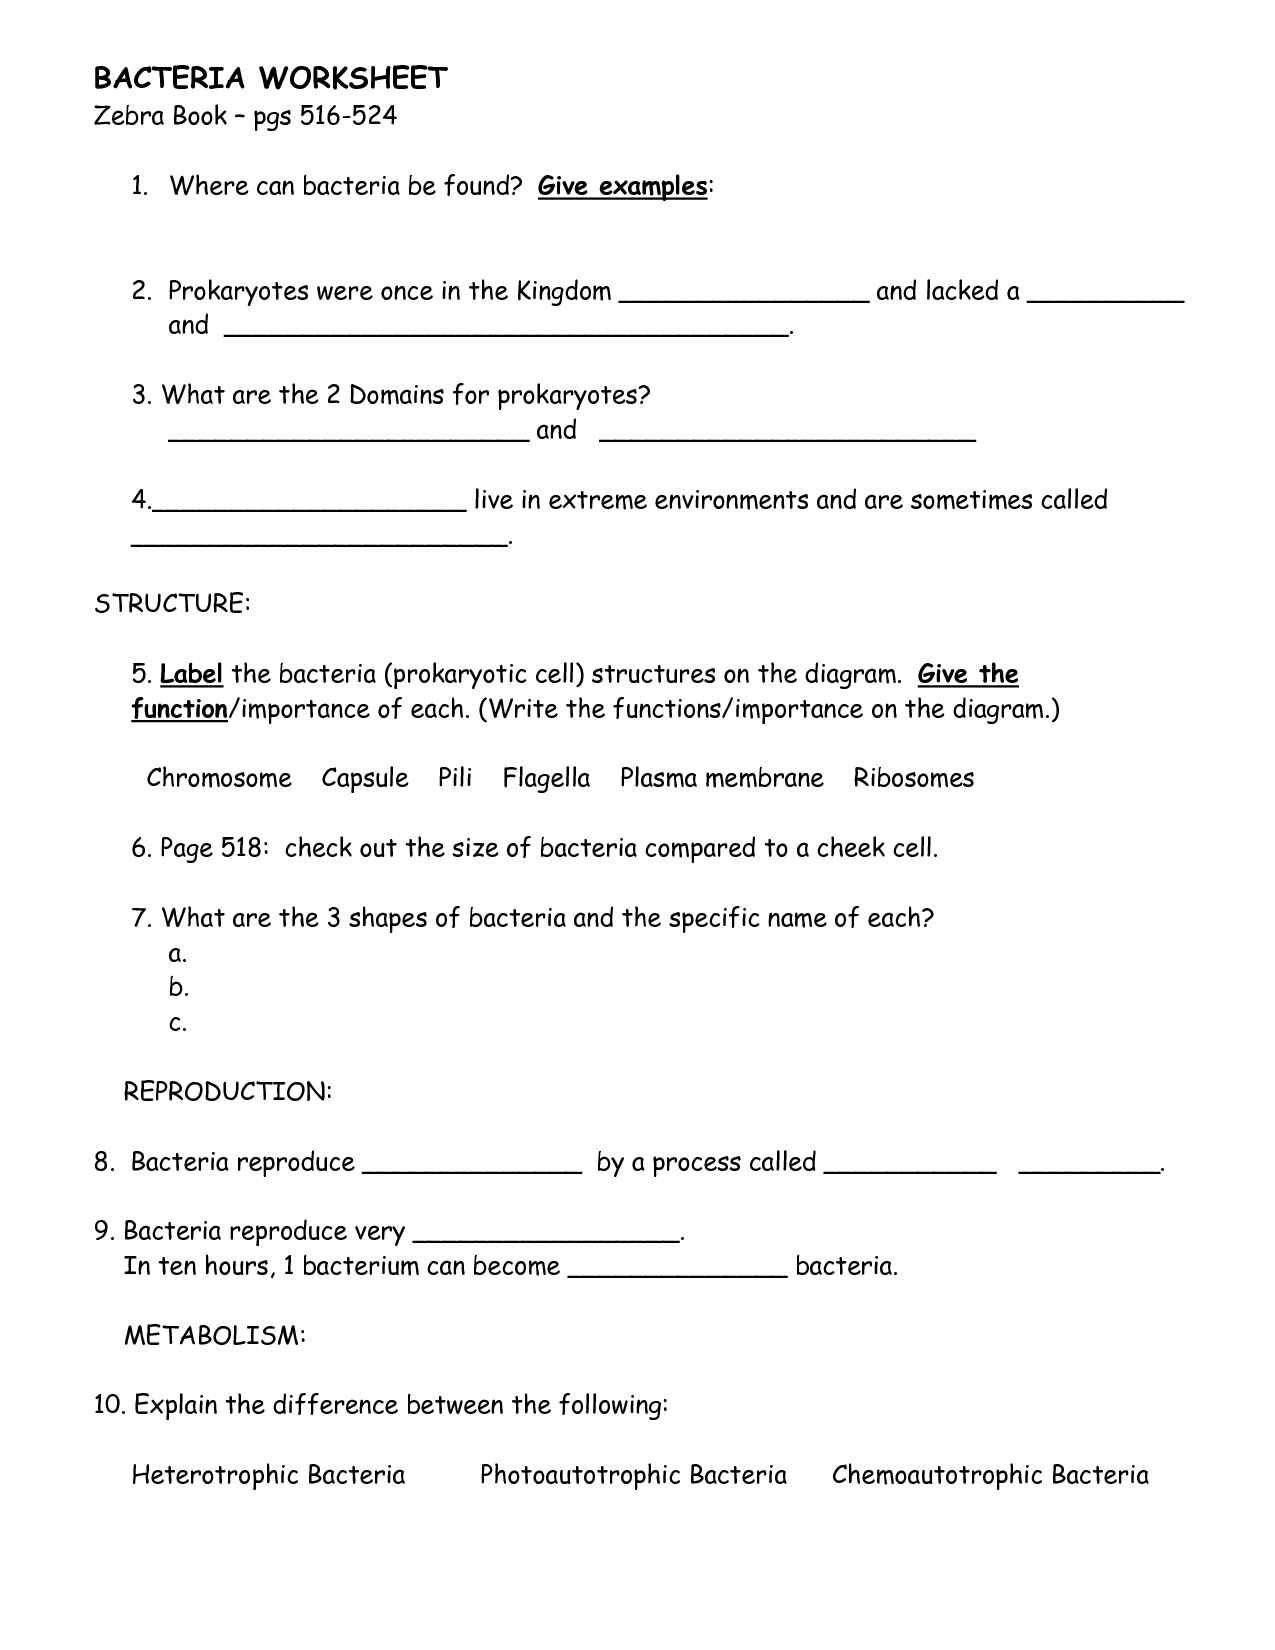 14 Best Images of Viruses And Bacteria Worksheets - Bacteria and